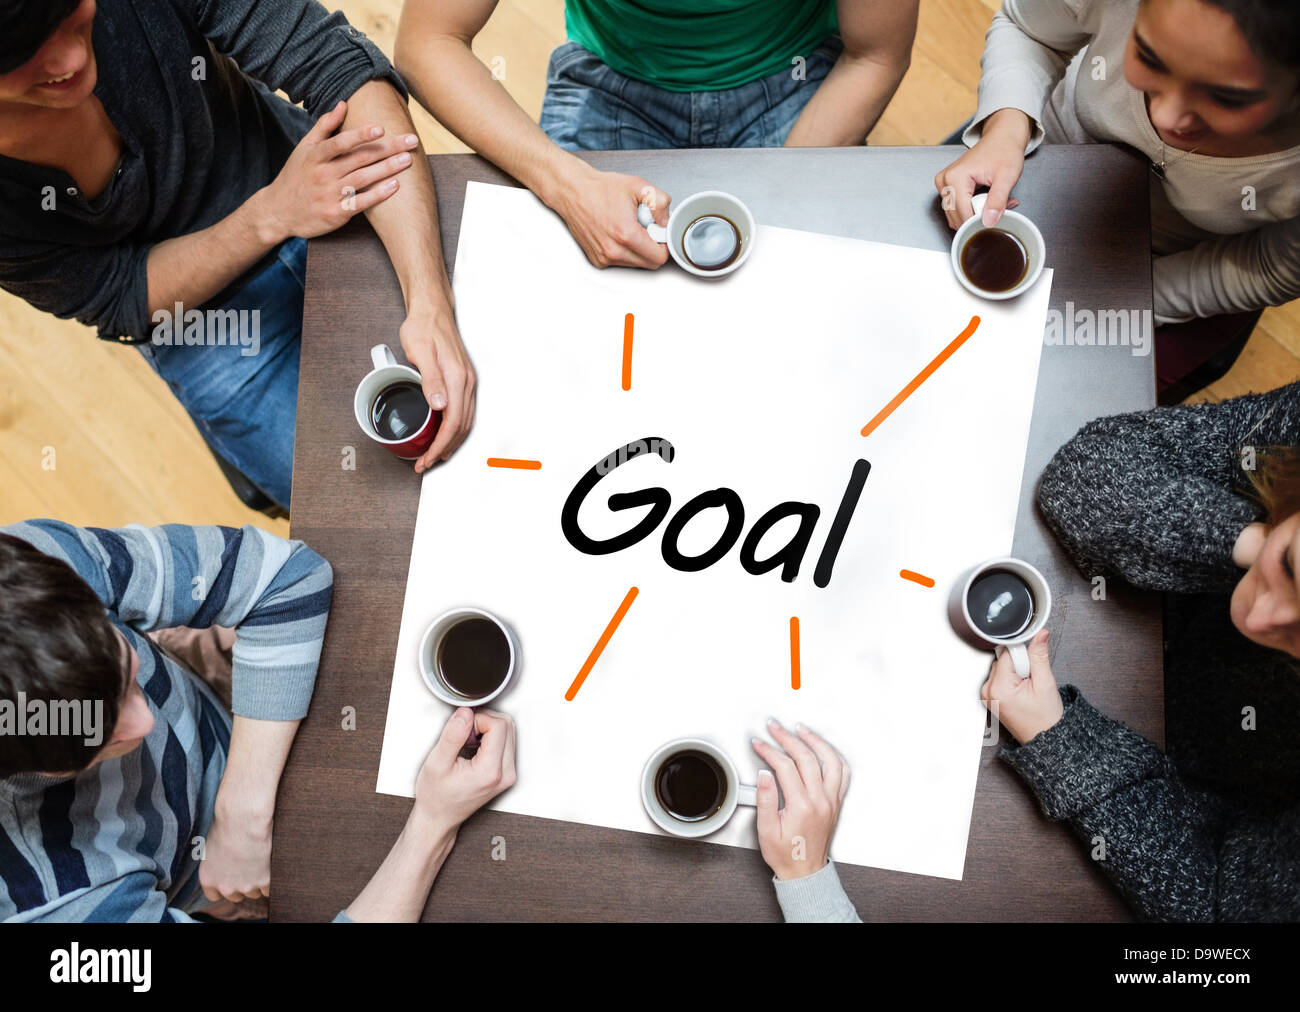 Team brainstorming over a poster with goal written on it Stock Photo